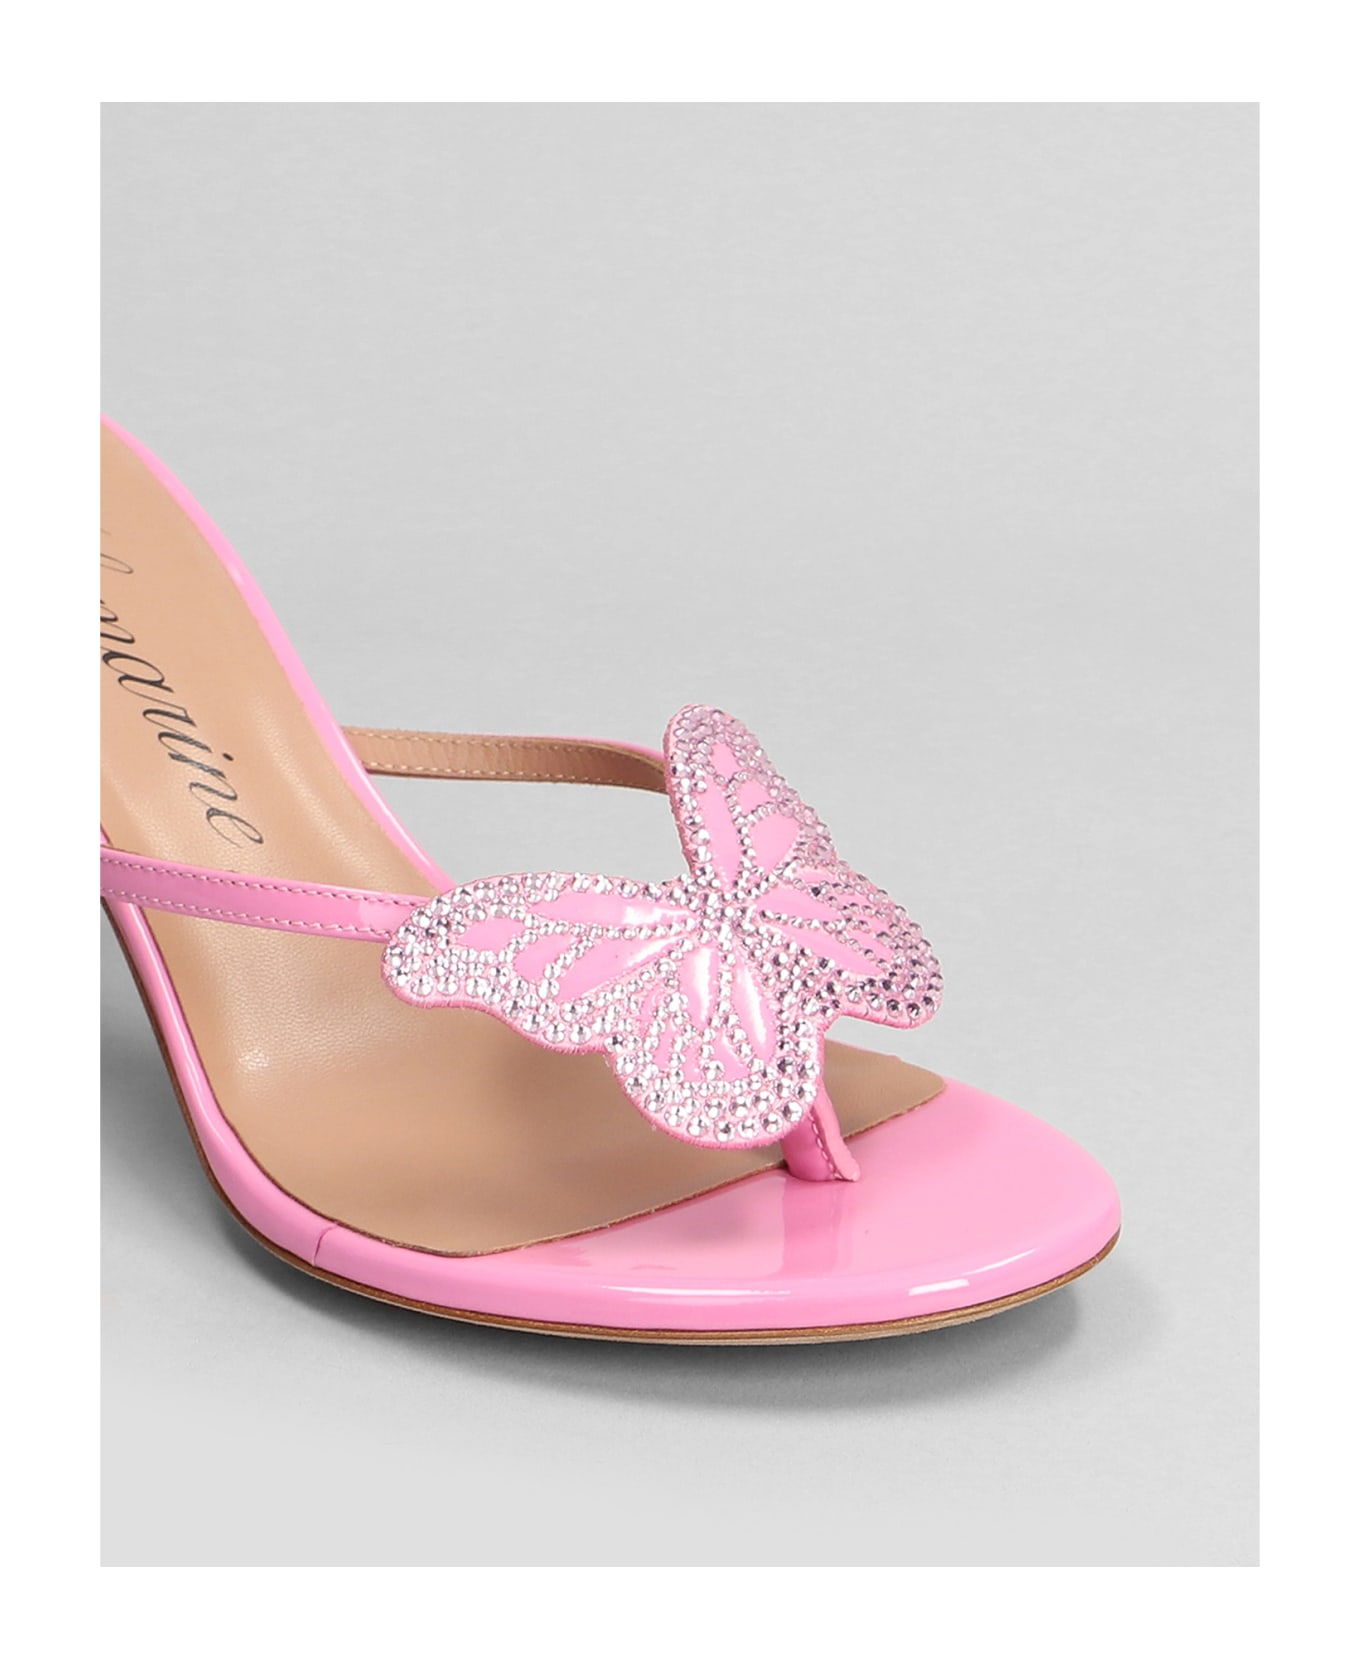 Blumarine Butterfly Slipper-mule In Rose-pink Patent Leather - rose-pink